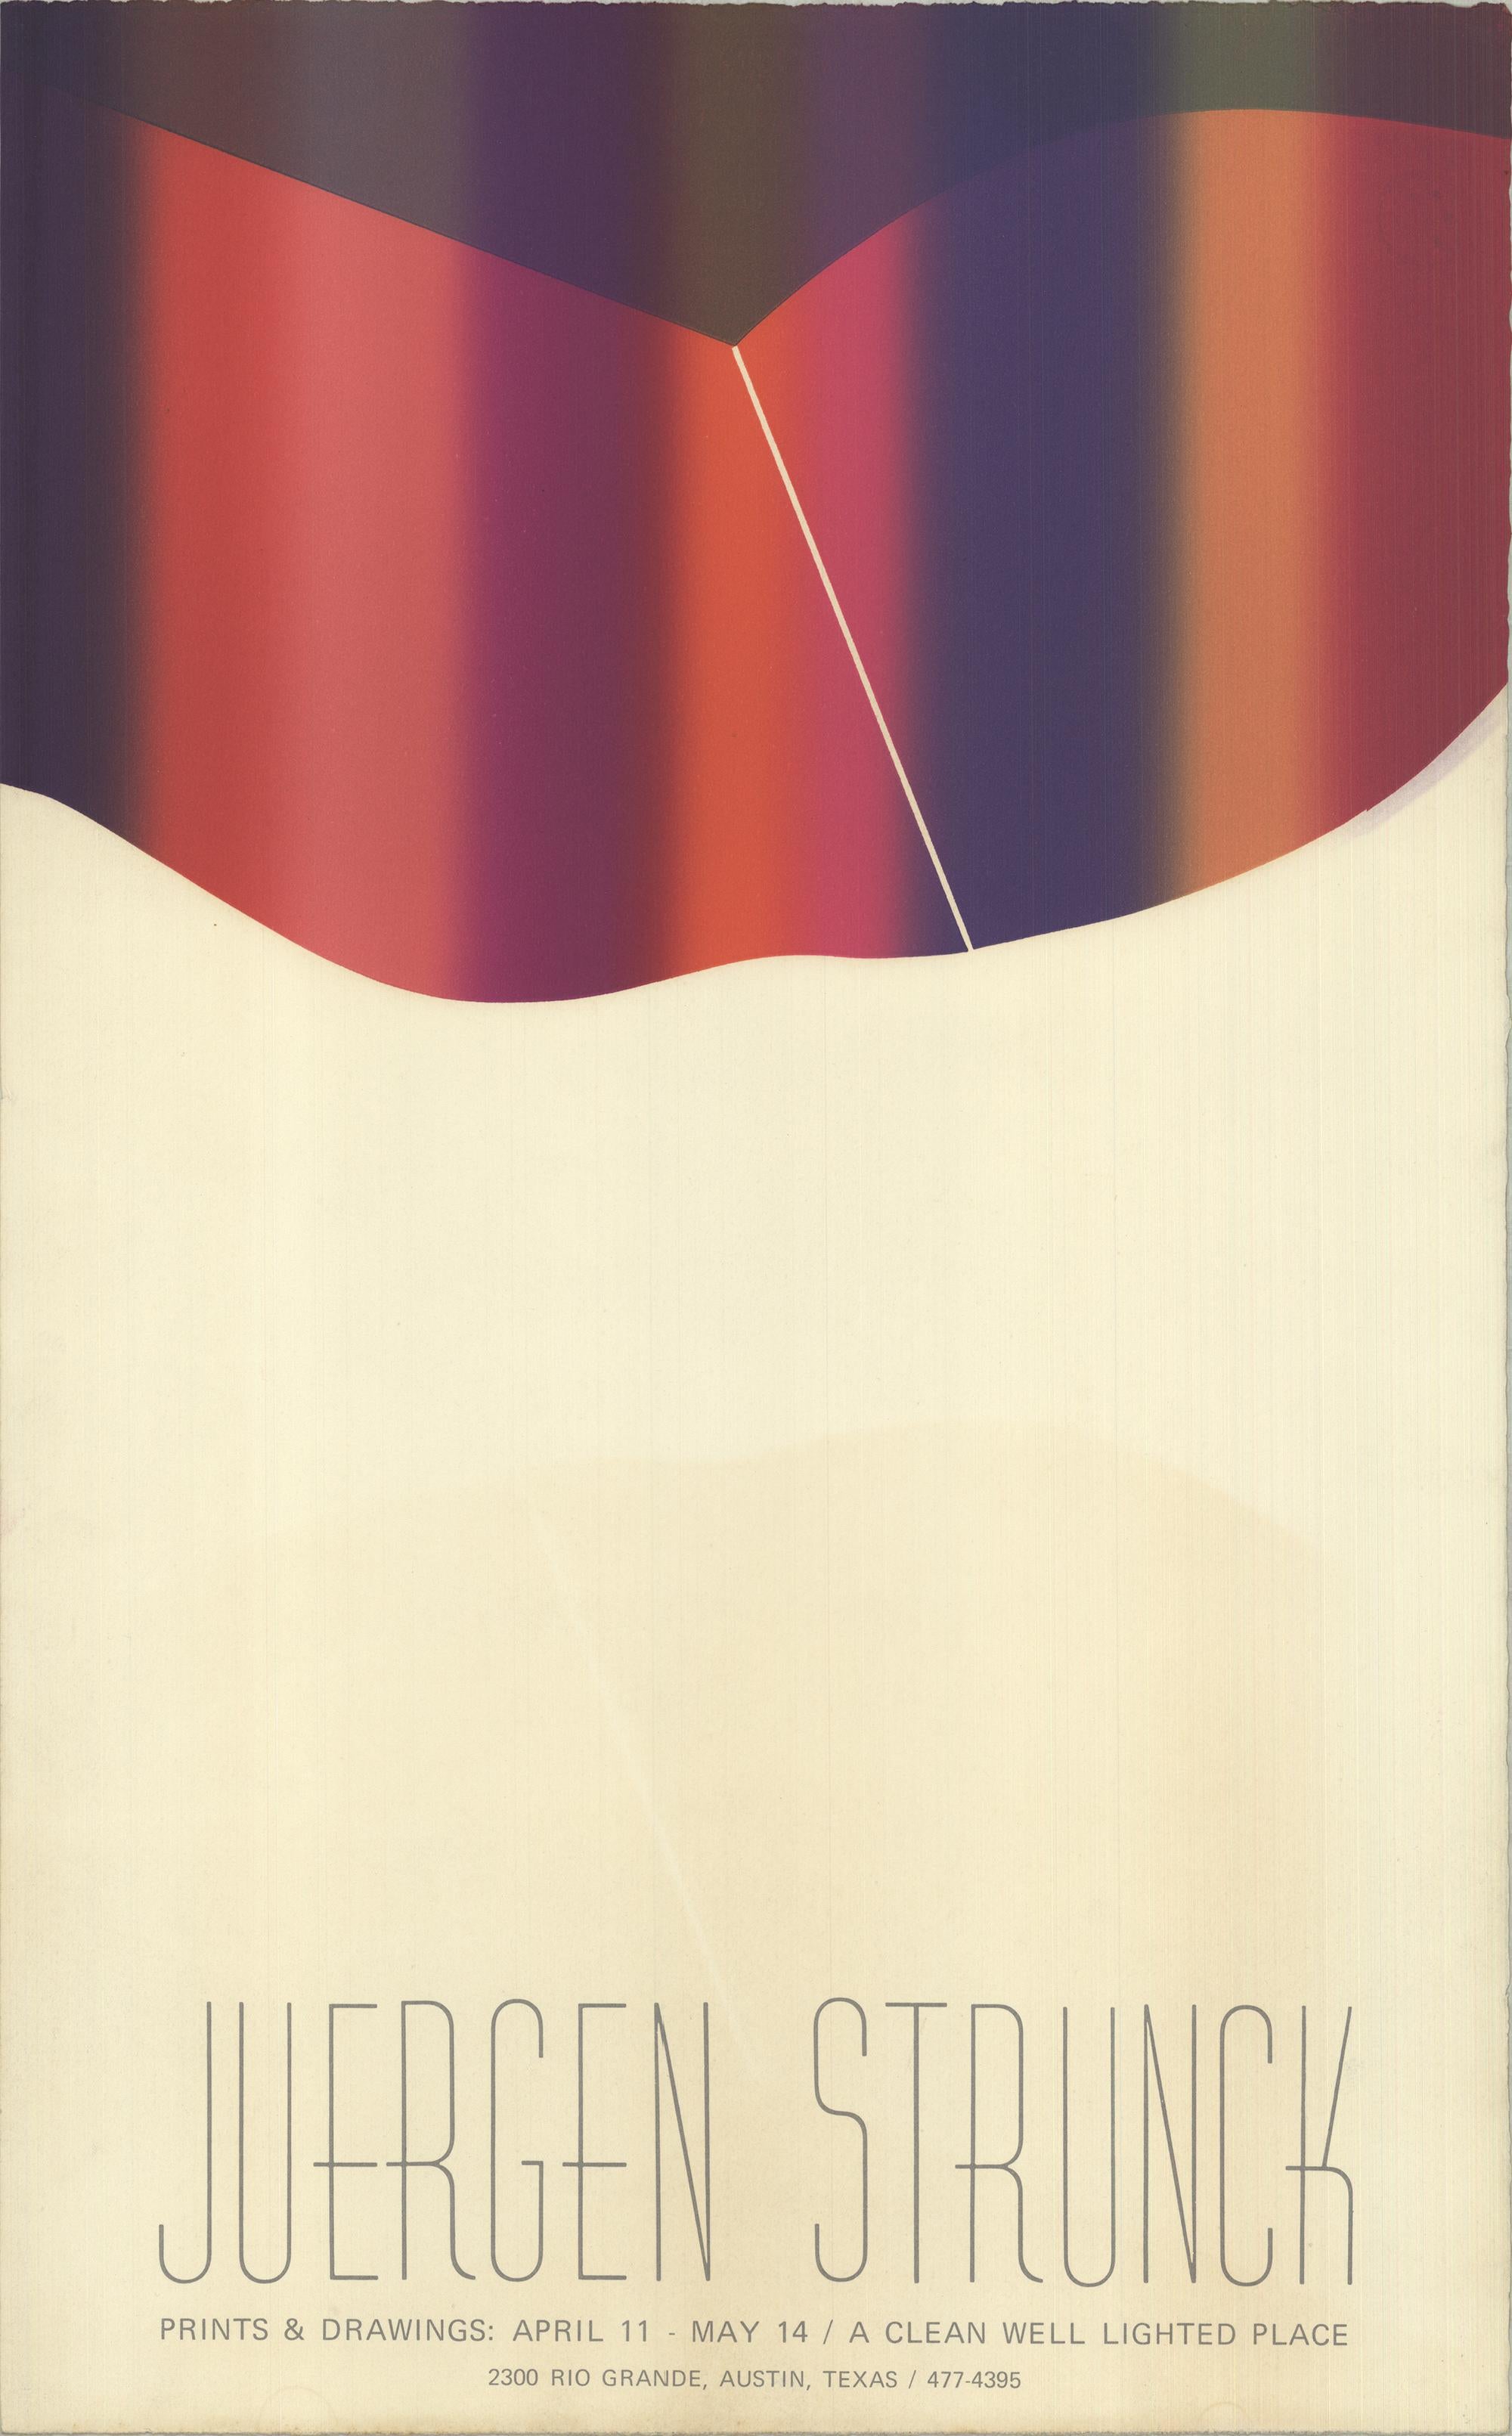 Juergen Strunck Abstract Print - Prints and Drawings